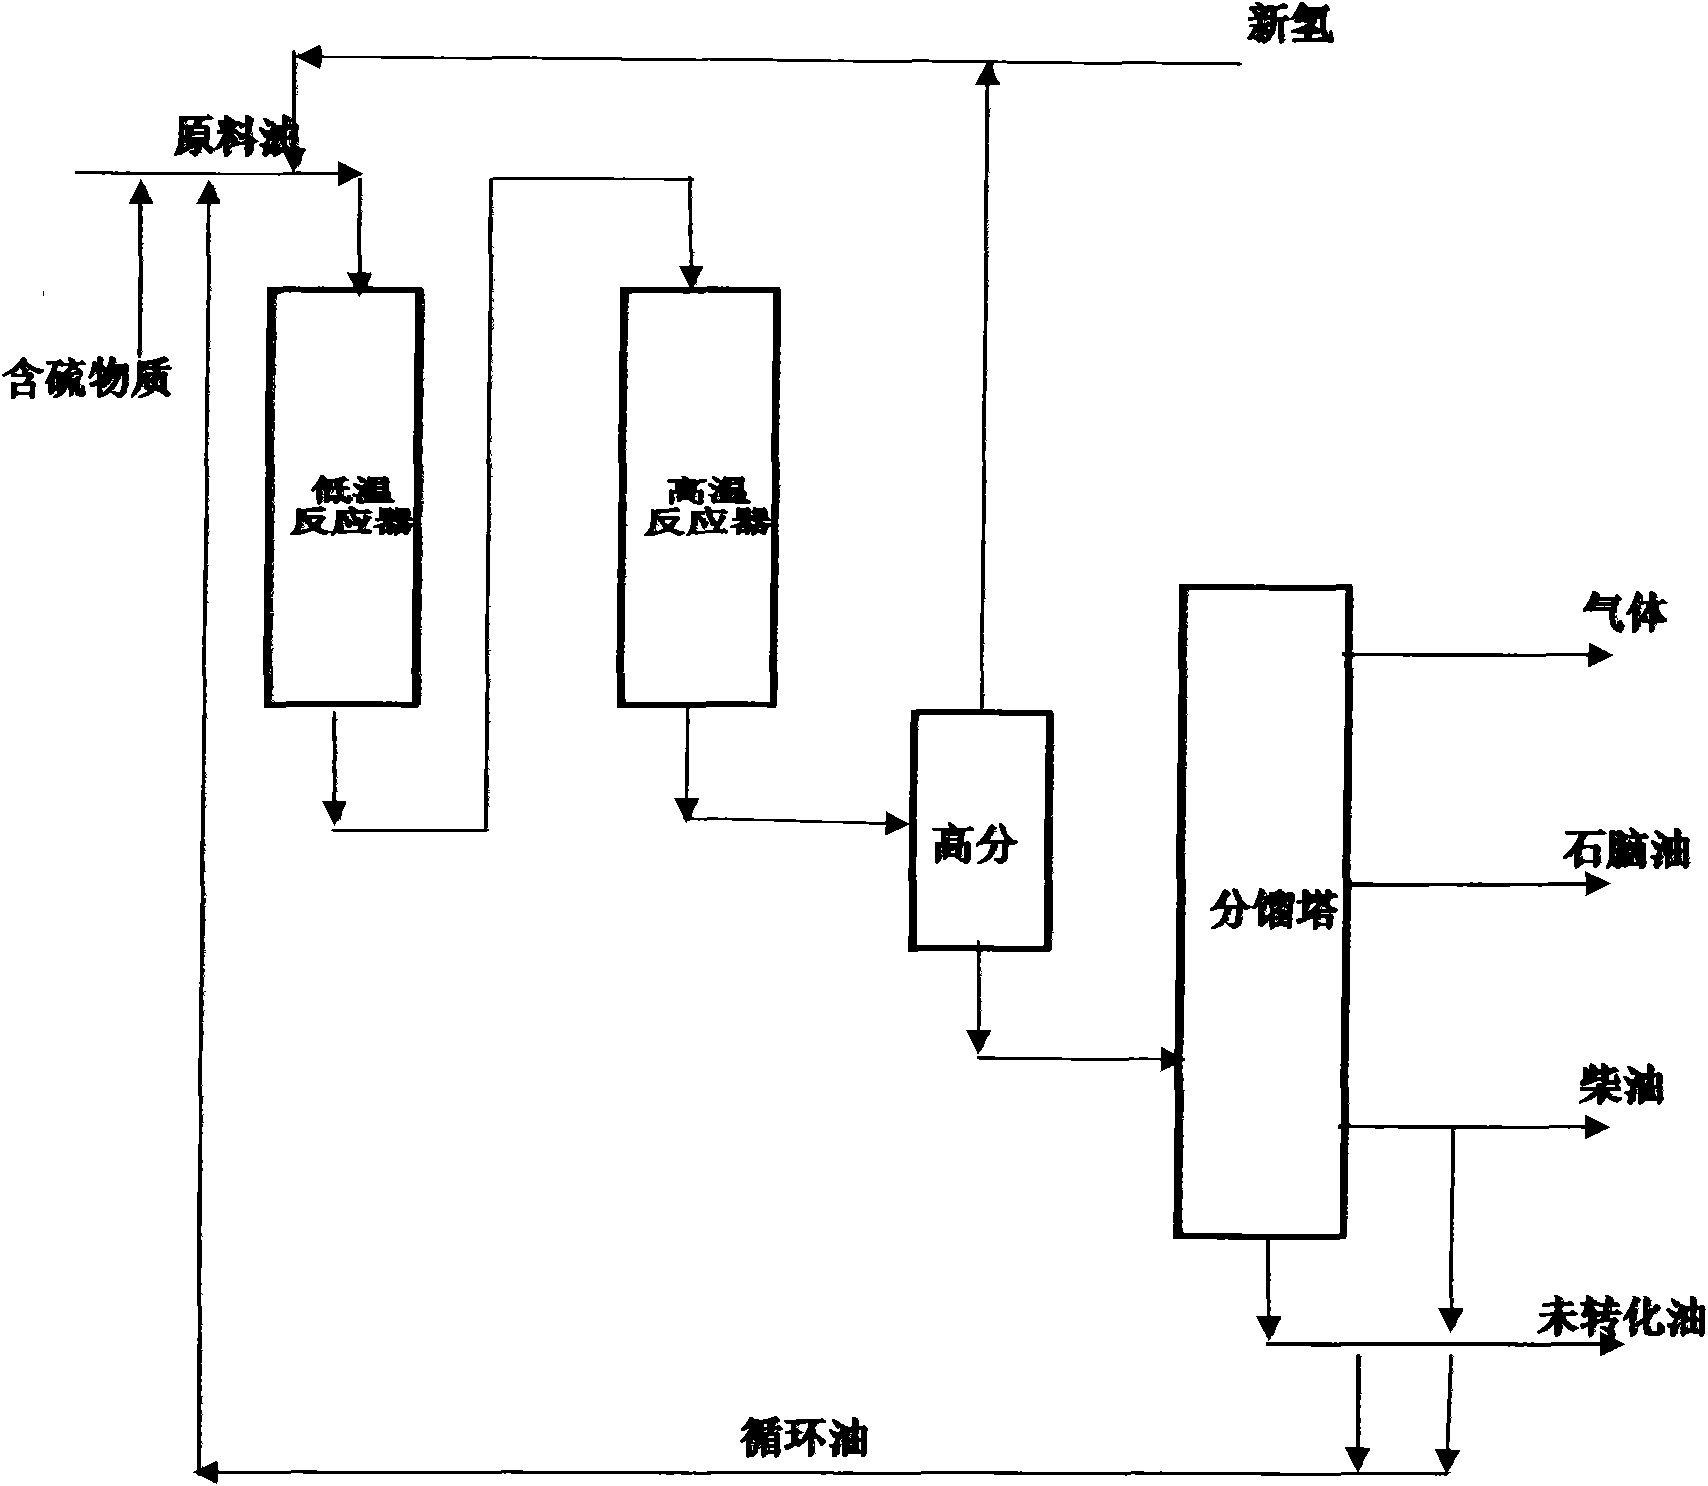 Hydrogenation method for producing motor fuel from biological grease